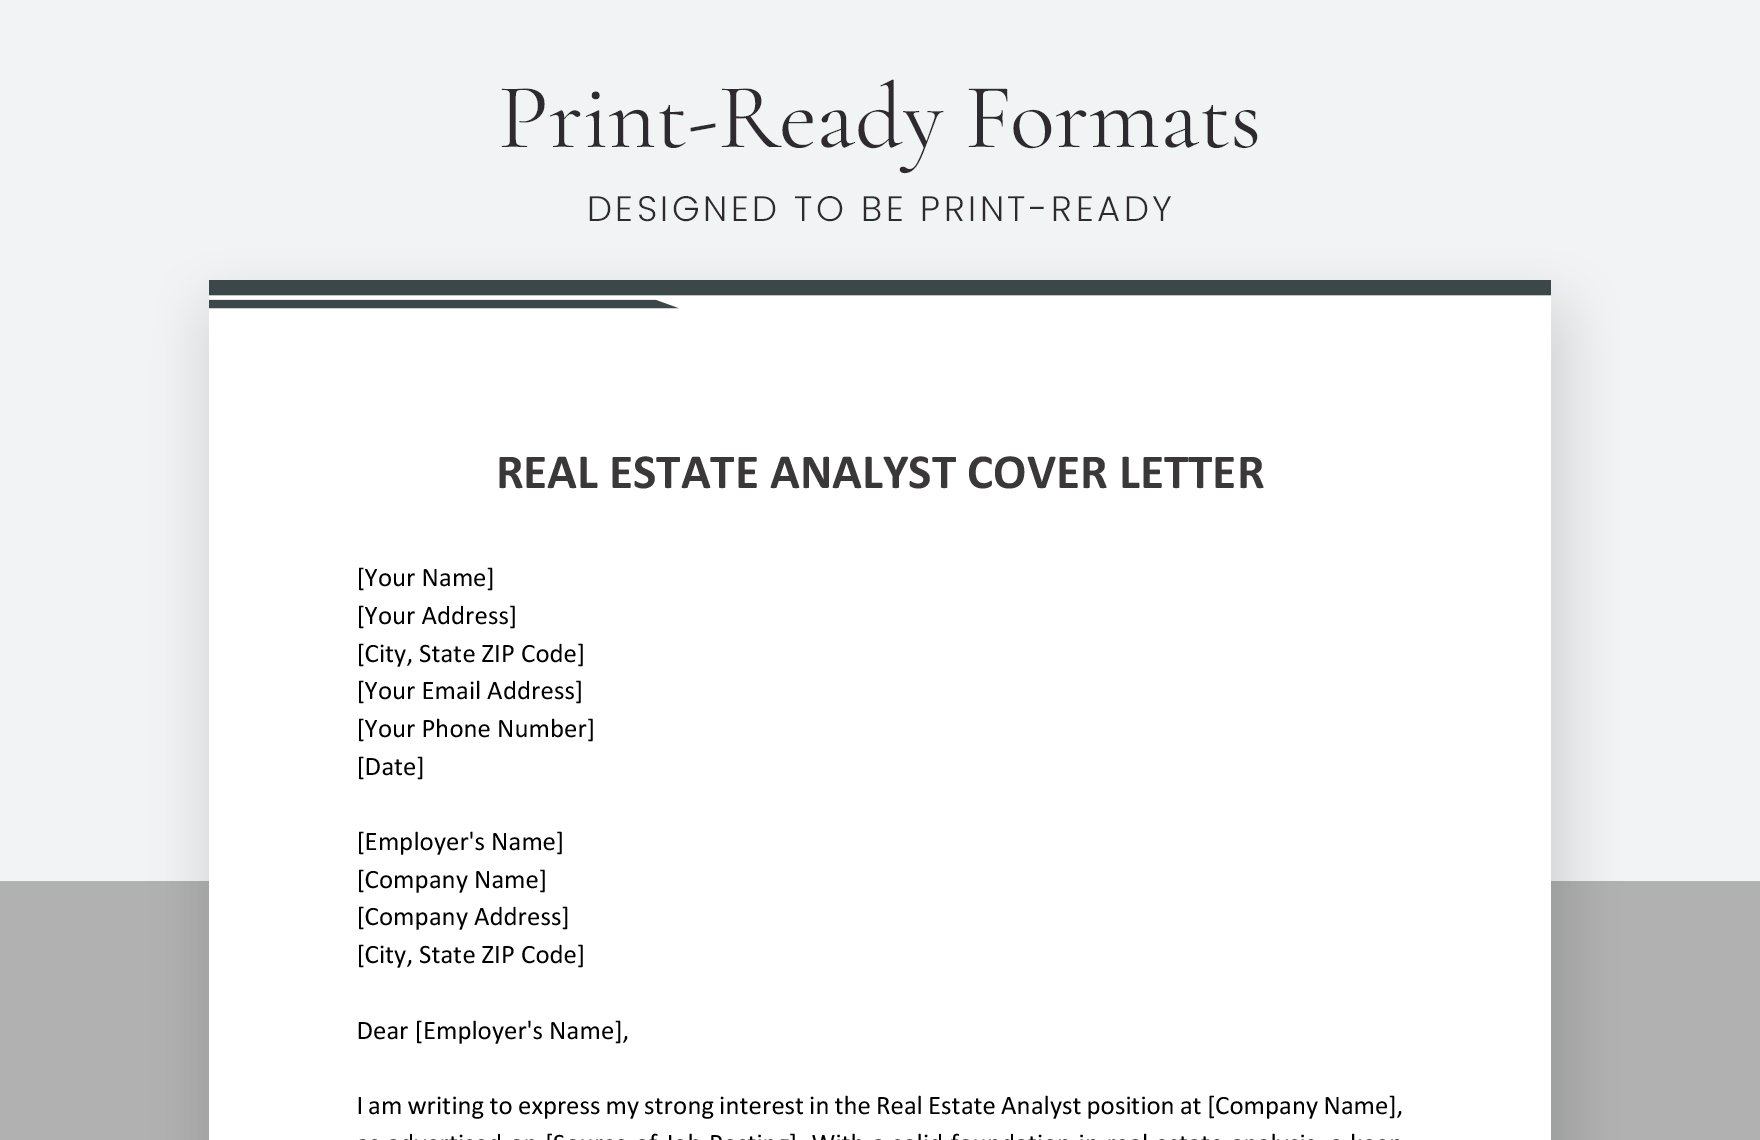 Real Estate Analyst Cover Letter